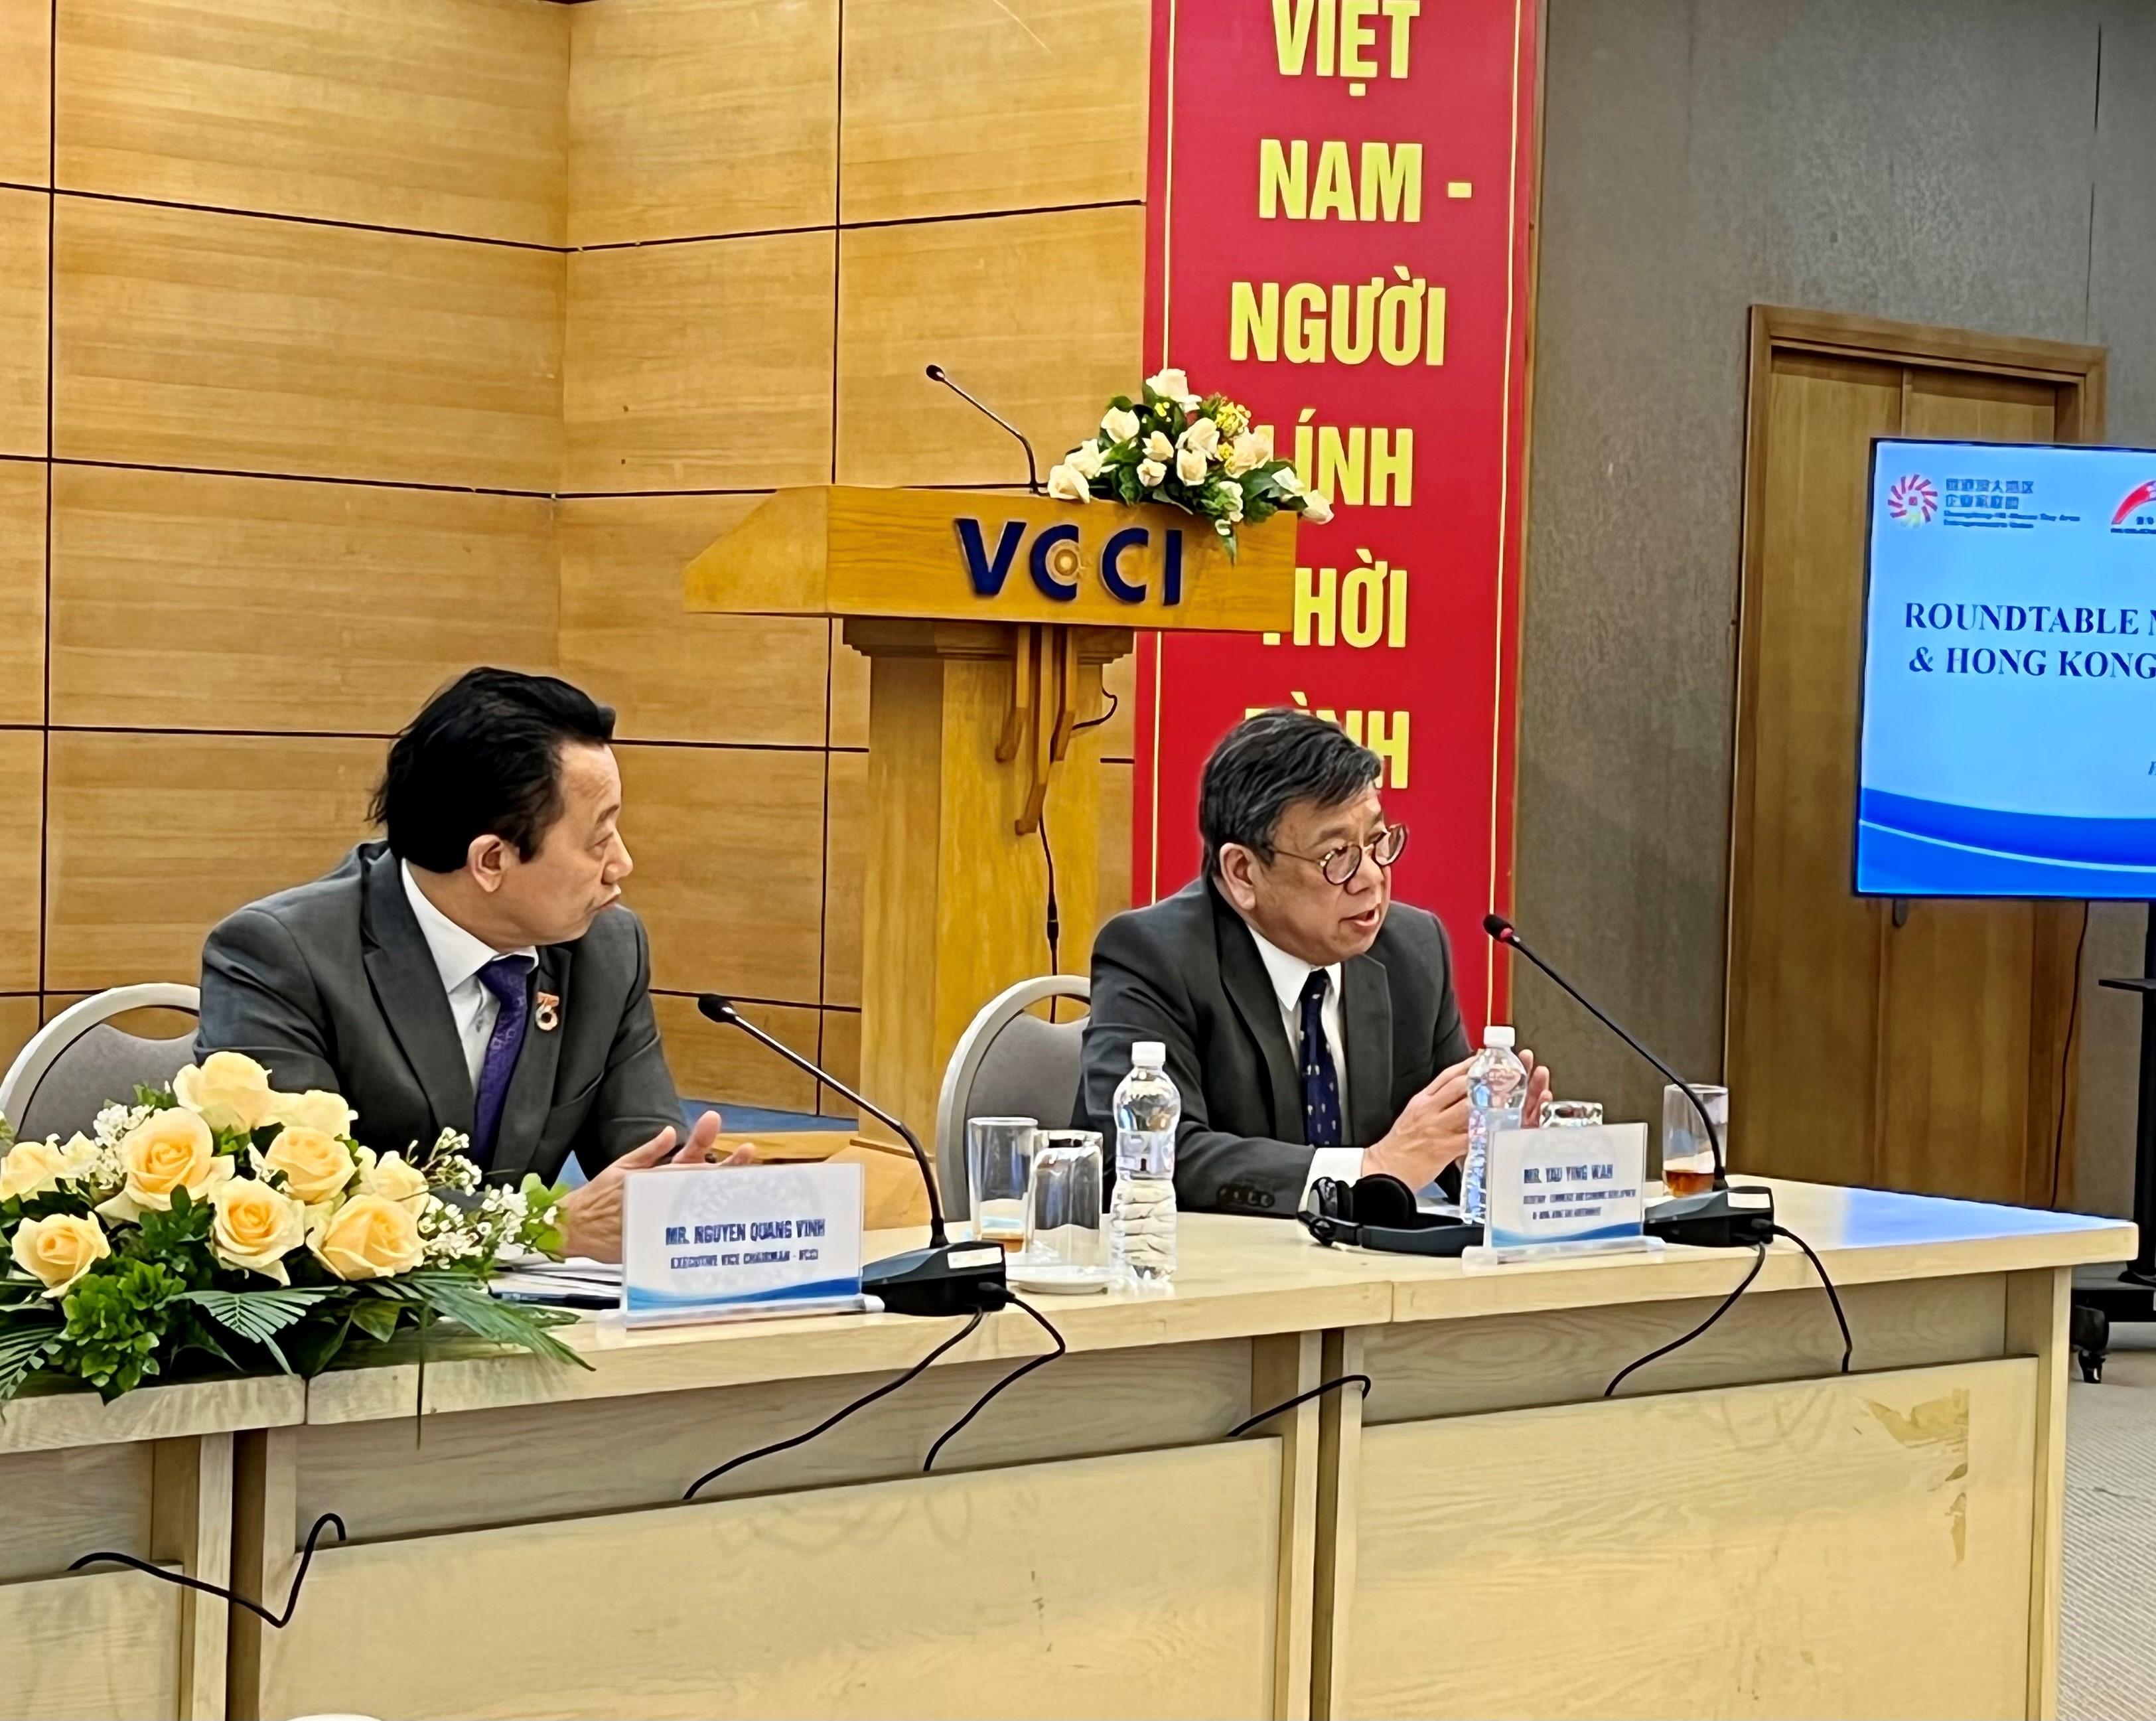 The Secretary for Commerce and Economic Development, Mr Algernon Yau, met with members of the Vietnam Chamber of Commerce and Industry in Hanoi, Vietnam, today (January 9) to promote Hong Kong's business advantages and investment opportunities, highlighting a number of measures announced in the Chief Executive's Policy Address to attract enterprises and investments more proactively and aggressively. Photo shows Mr Yau (right) speaking at the meeting.